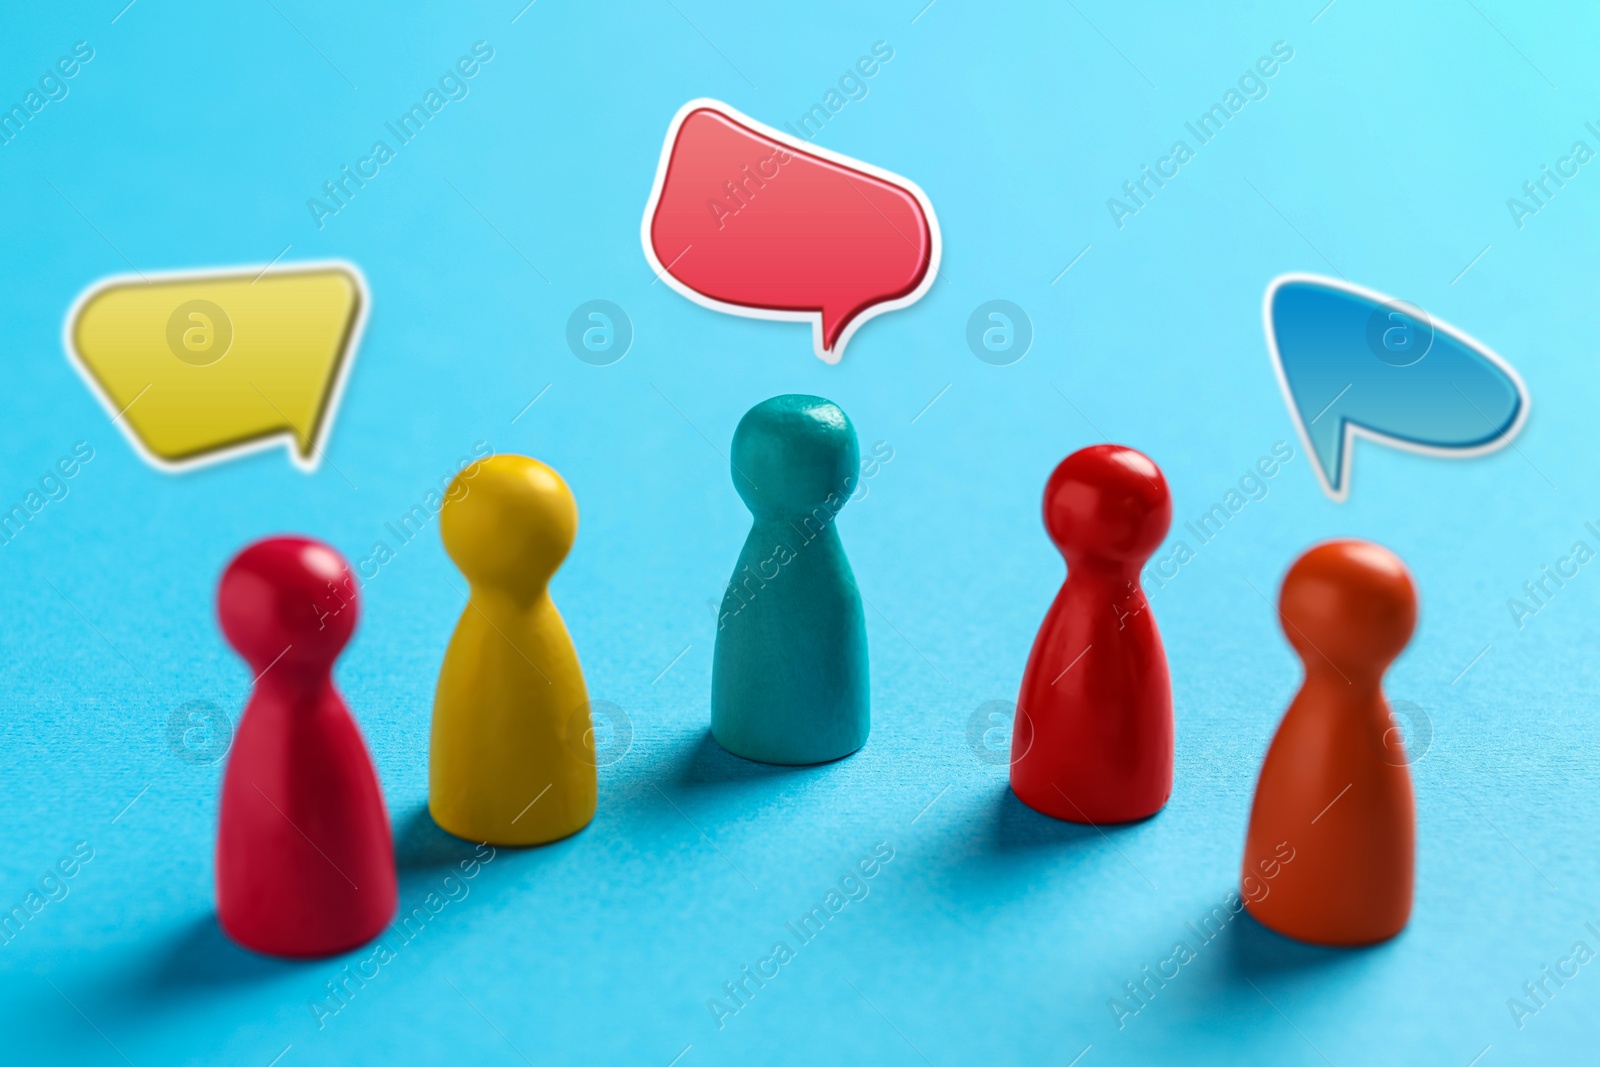 Image of Productive dialogue, meaningful conversation, considerable discussion. Speech bubbles over colorful pawns on light blue background